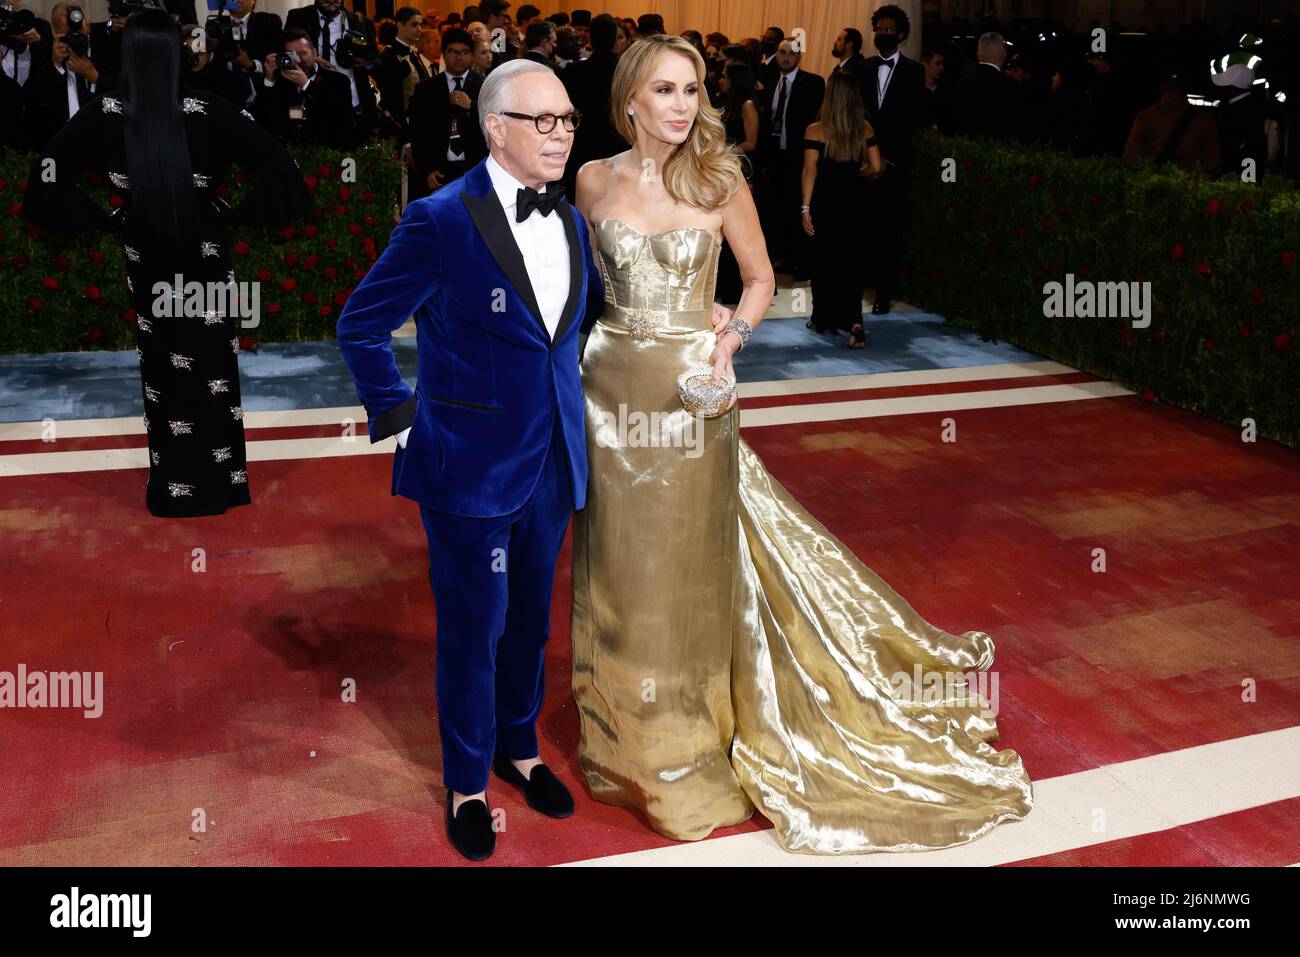 New York, United States. 03rd May, 2022. Tommy Hilfiger and Ocleppo arrive on the red carpet for The Met at The Metropolitan Museum of Art celebrating the Costume Institute opening